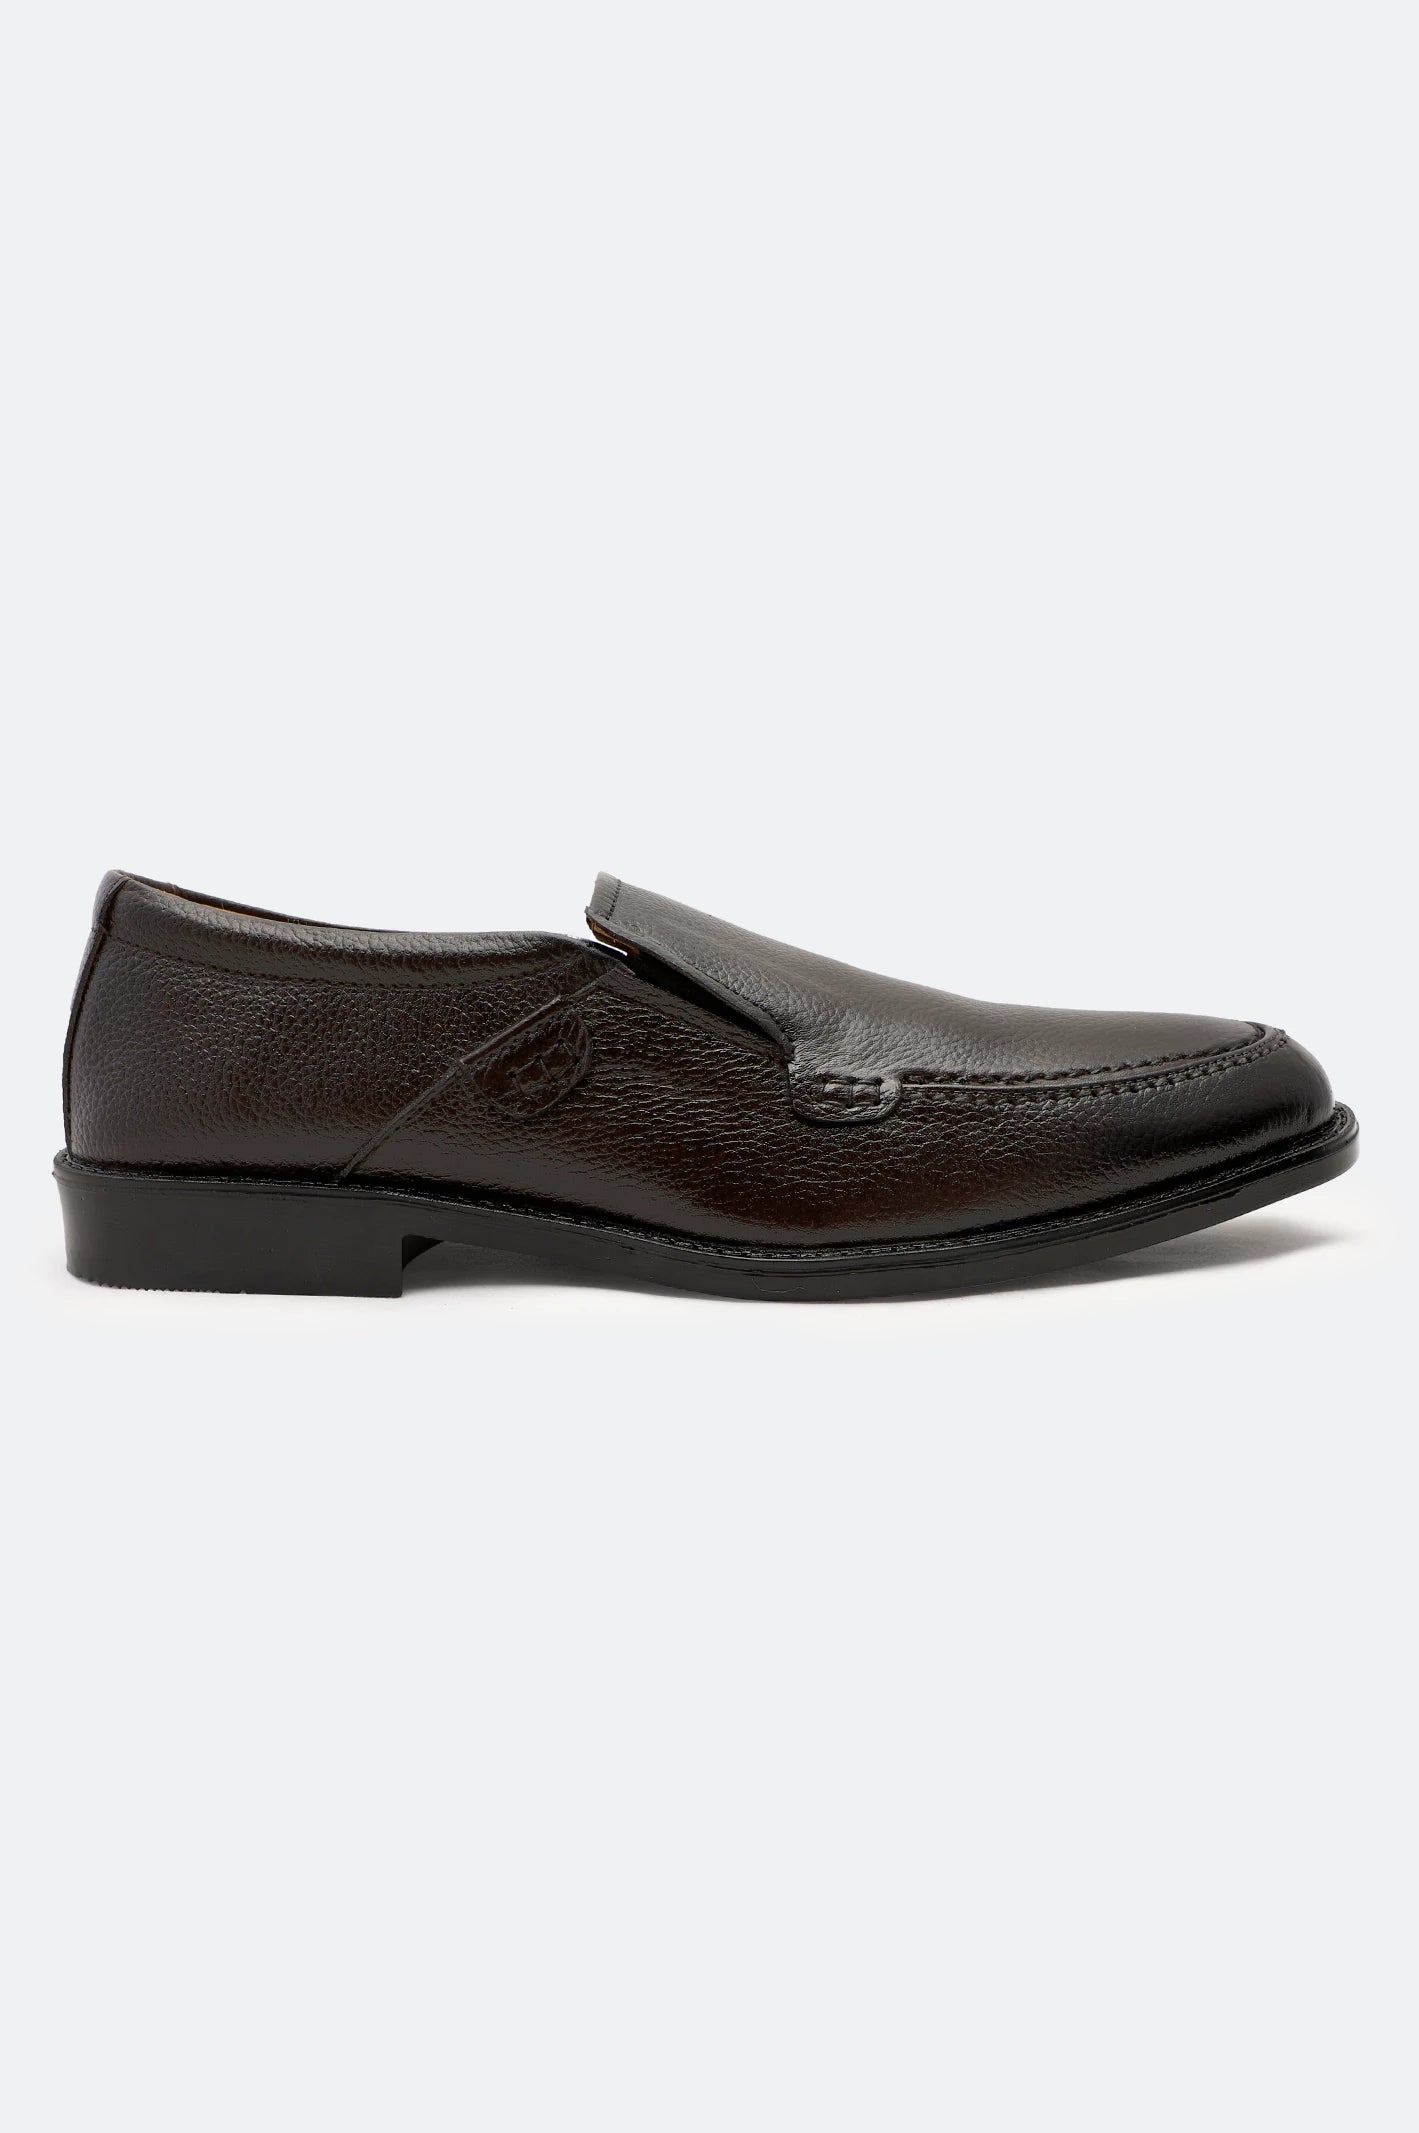 Brown Formal Moccasins Shoes From Diners